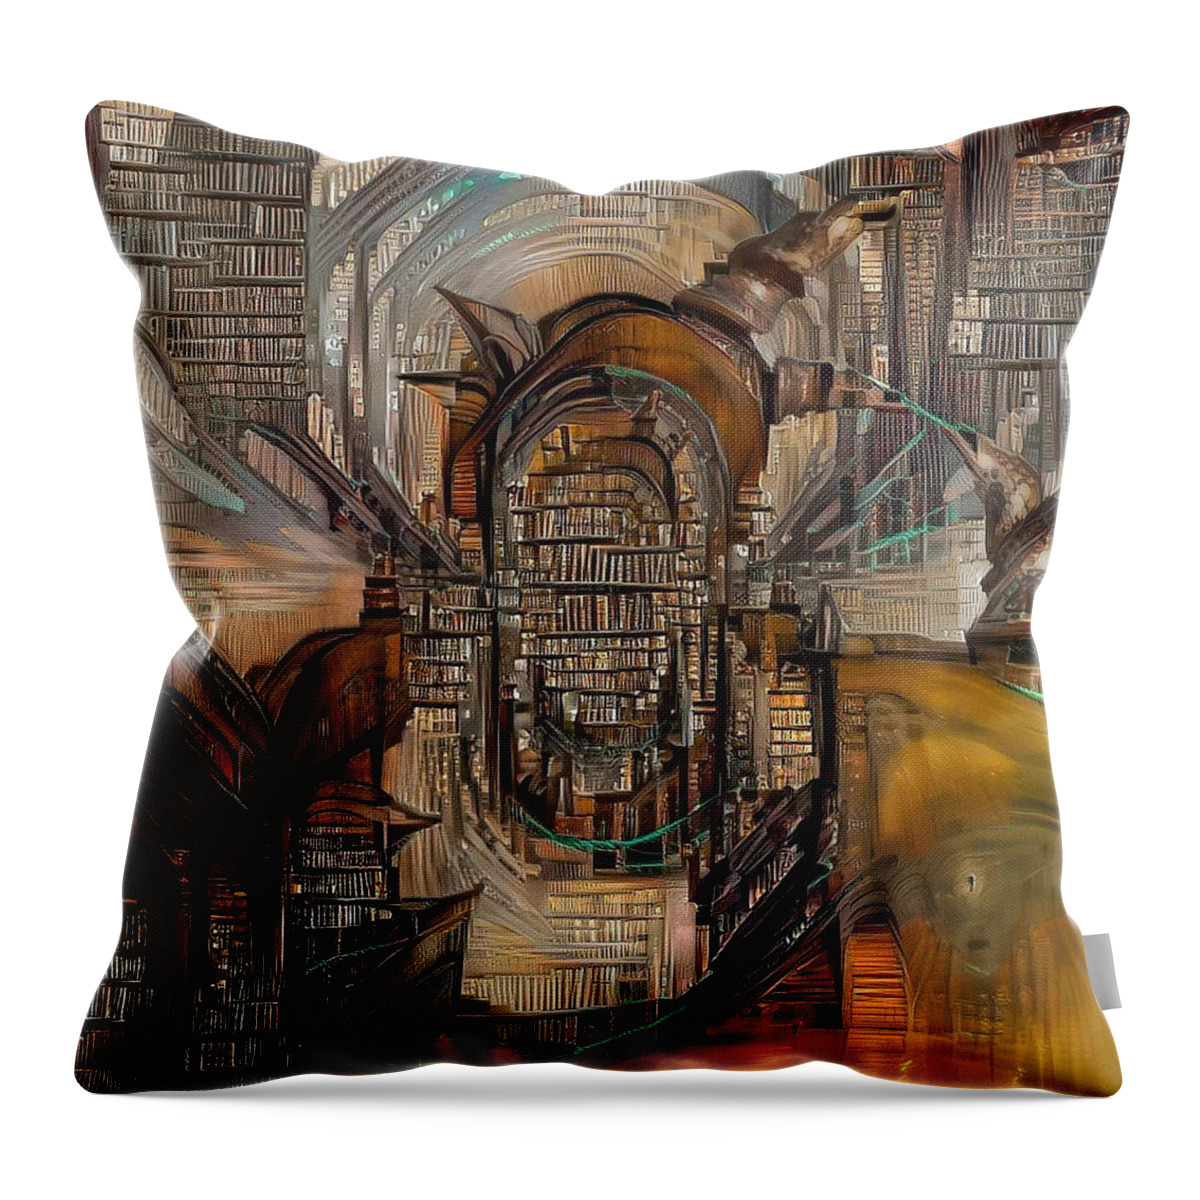 Sculpture Throw Pillow featuring the digital art Abstract Liberty by Bruce Rolff